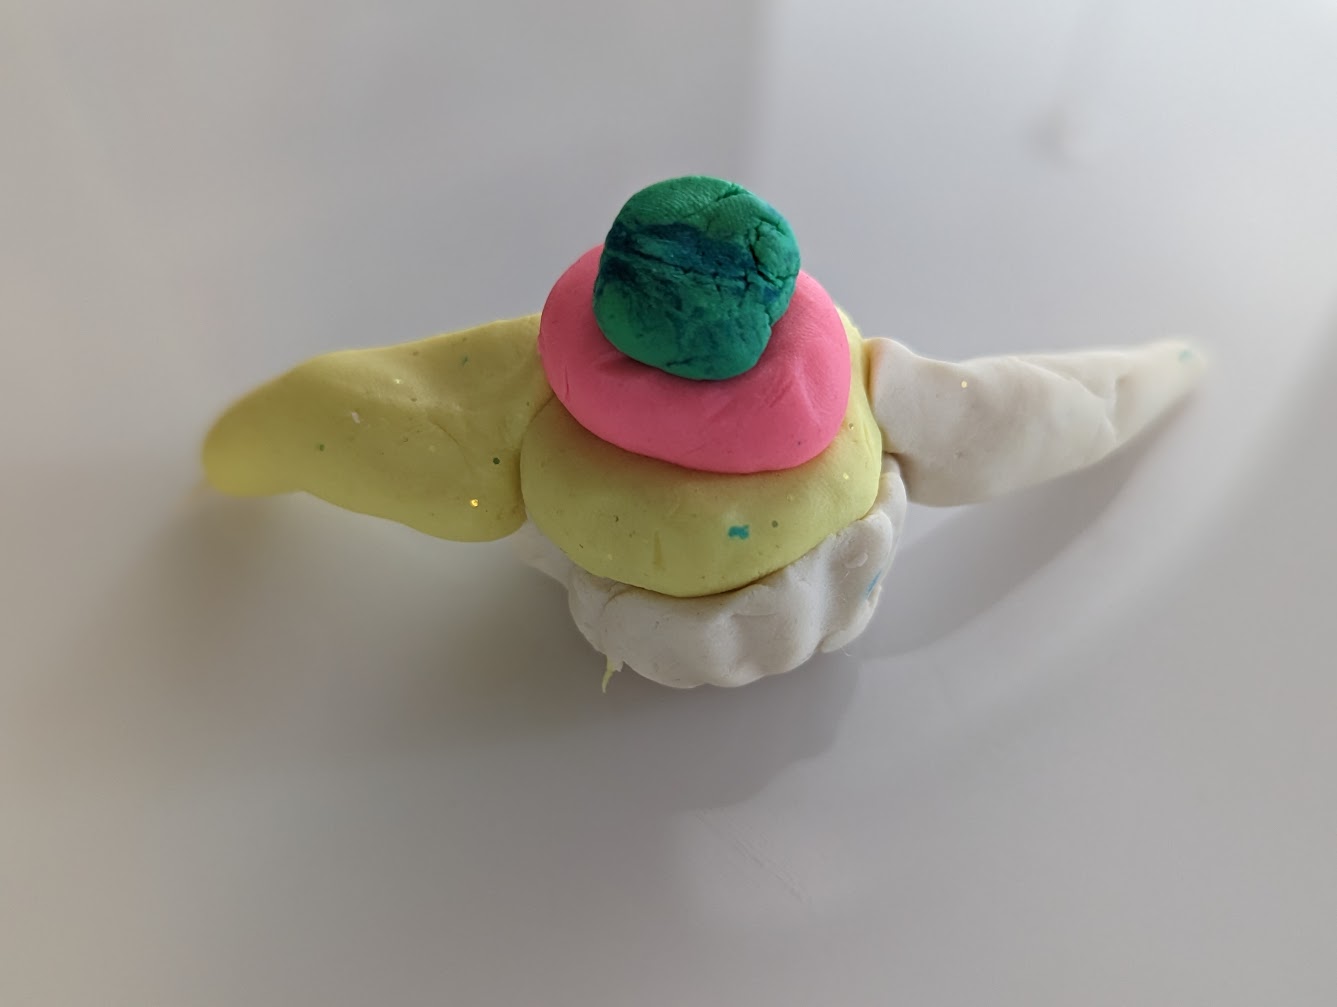 Play-doh cupcake for Mom